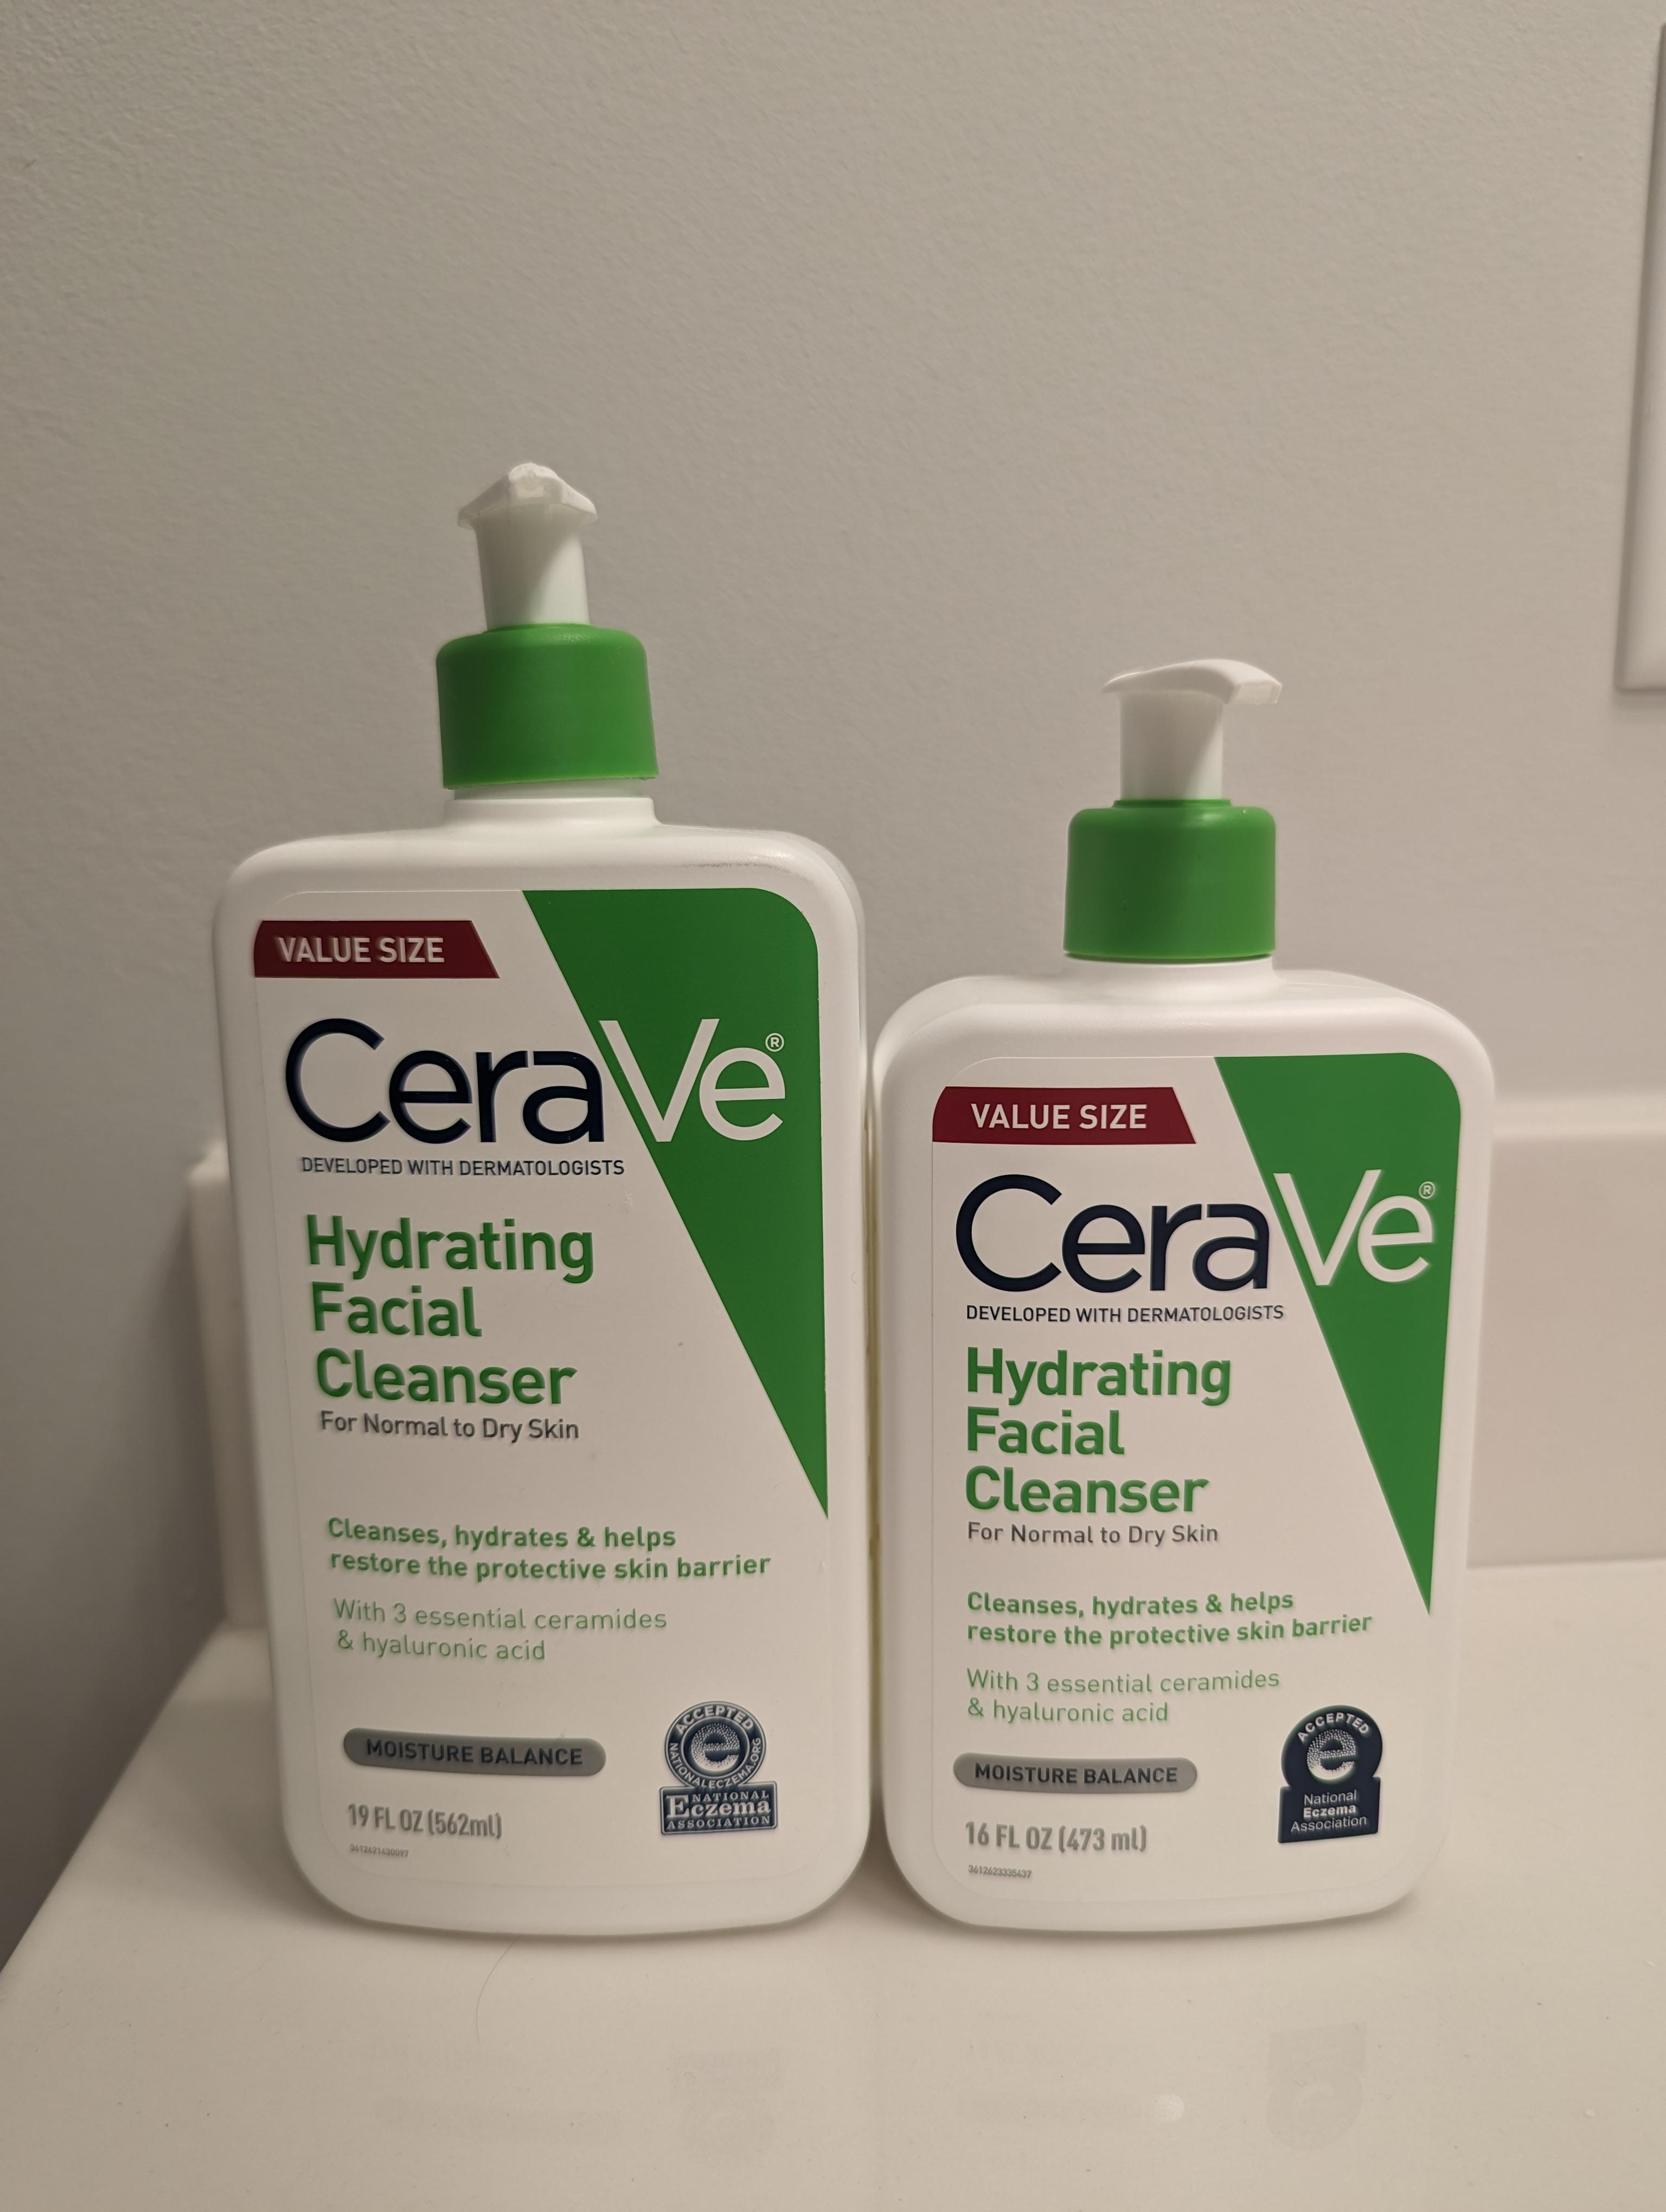 Cerave Face Wash: Price, Ingredients, For Oily skin, Dry Skin, Foaming?